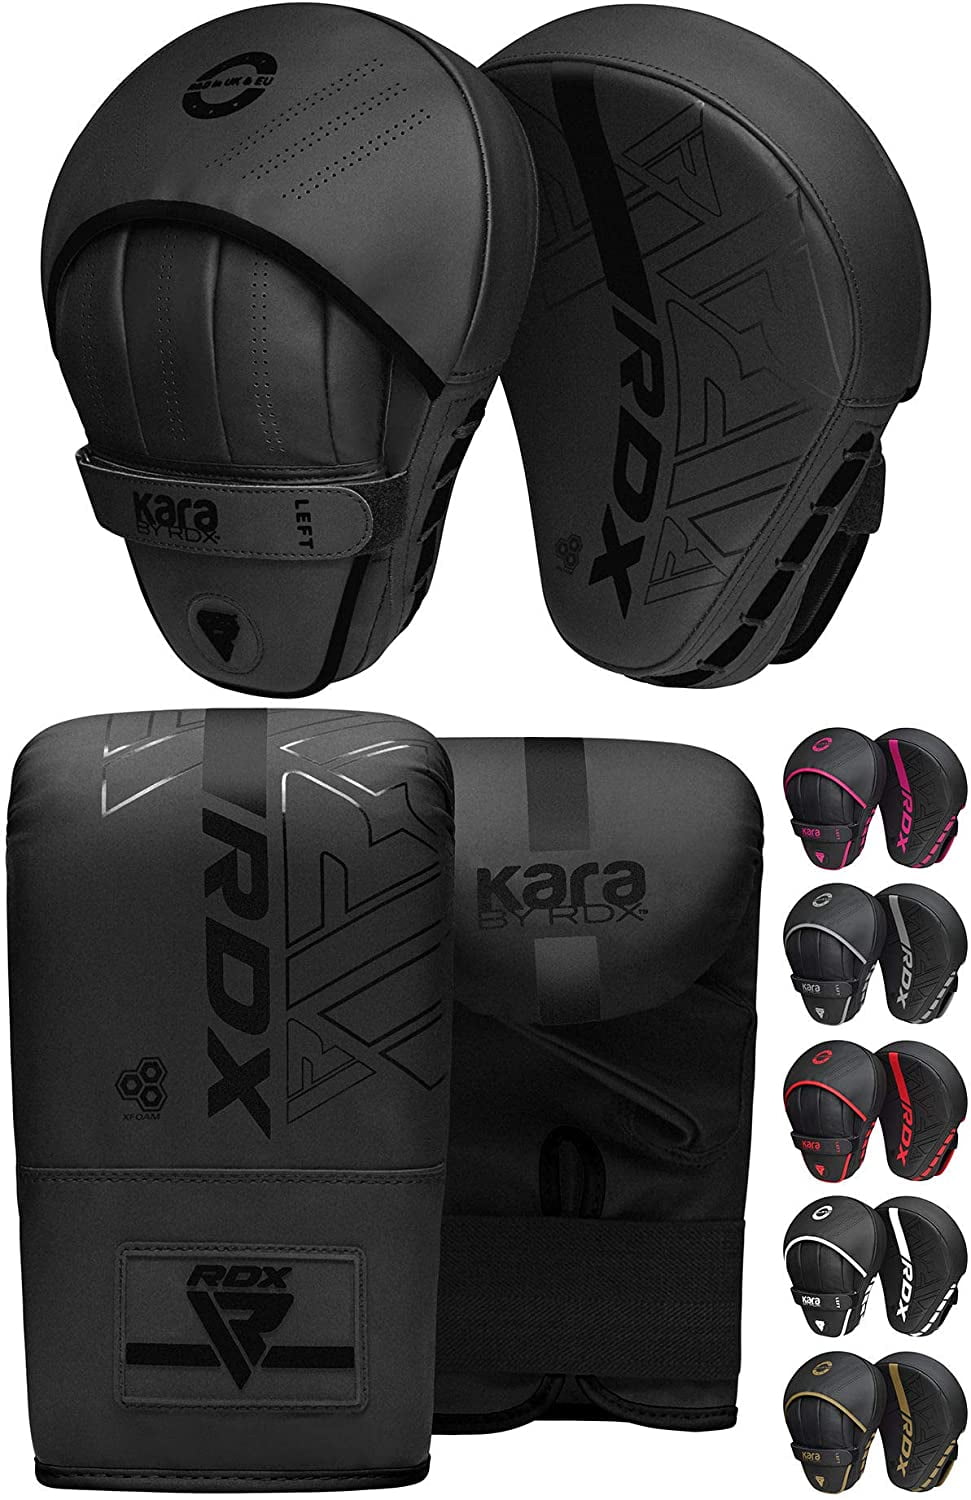 Martial Arts Coaching Strike Shield RDX Boxing Pads Focus Mitts Convex Skin Leather Curved Hook and Jab Target Hand Pads Great for MMA Kickboxing & Karate Training Padded Punching Muay Thai 